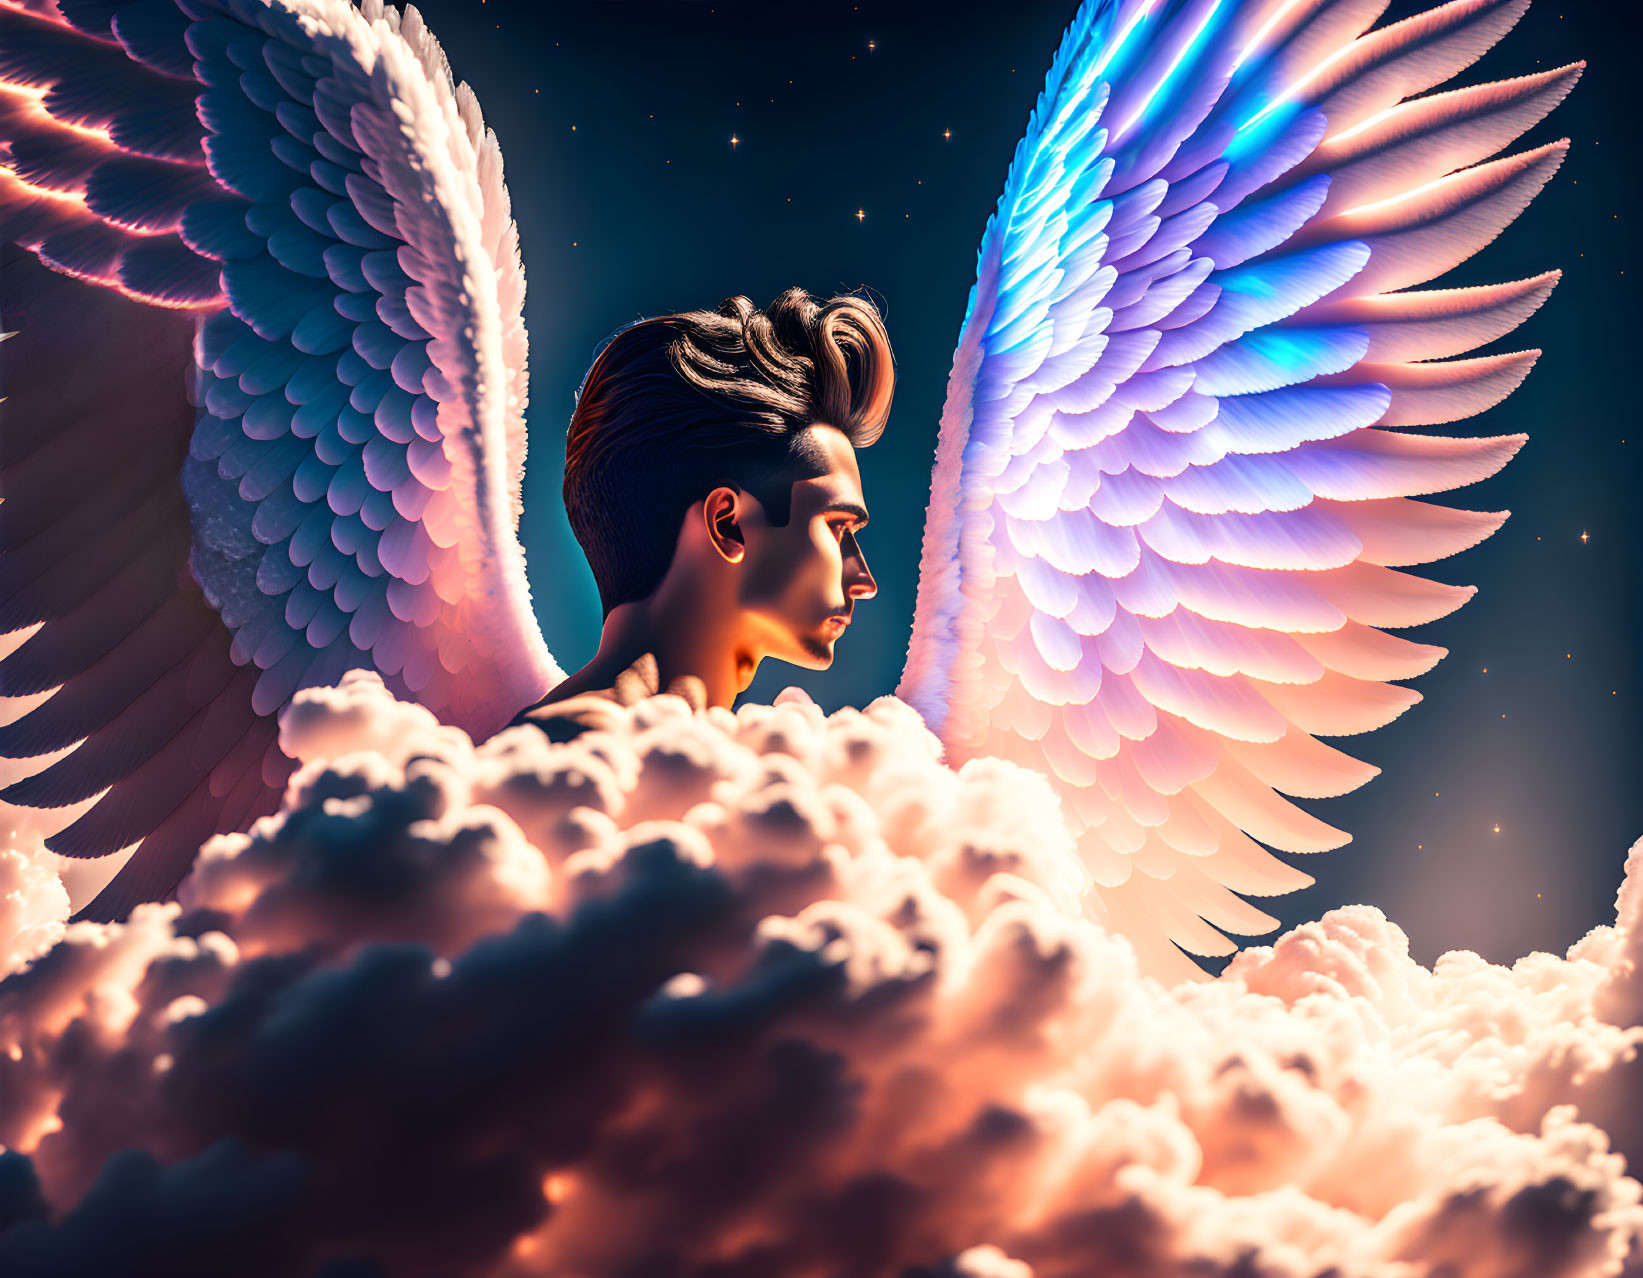 Person with Large, Luminous Wings in Starry Sky & Clouds